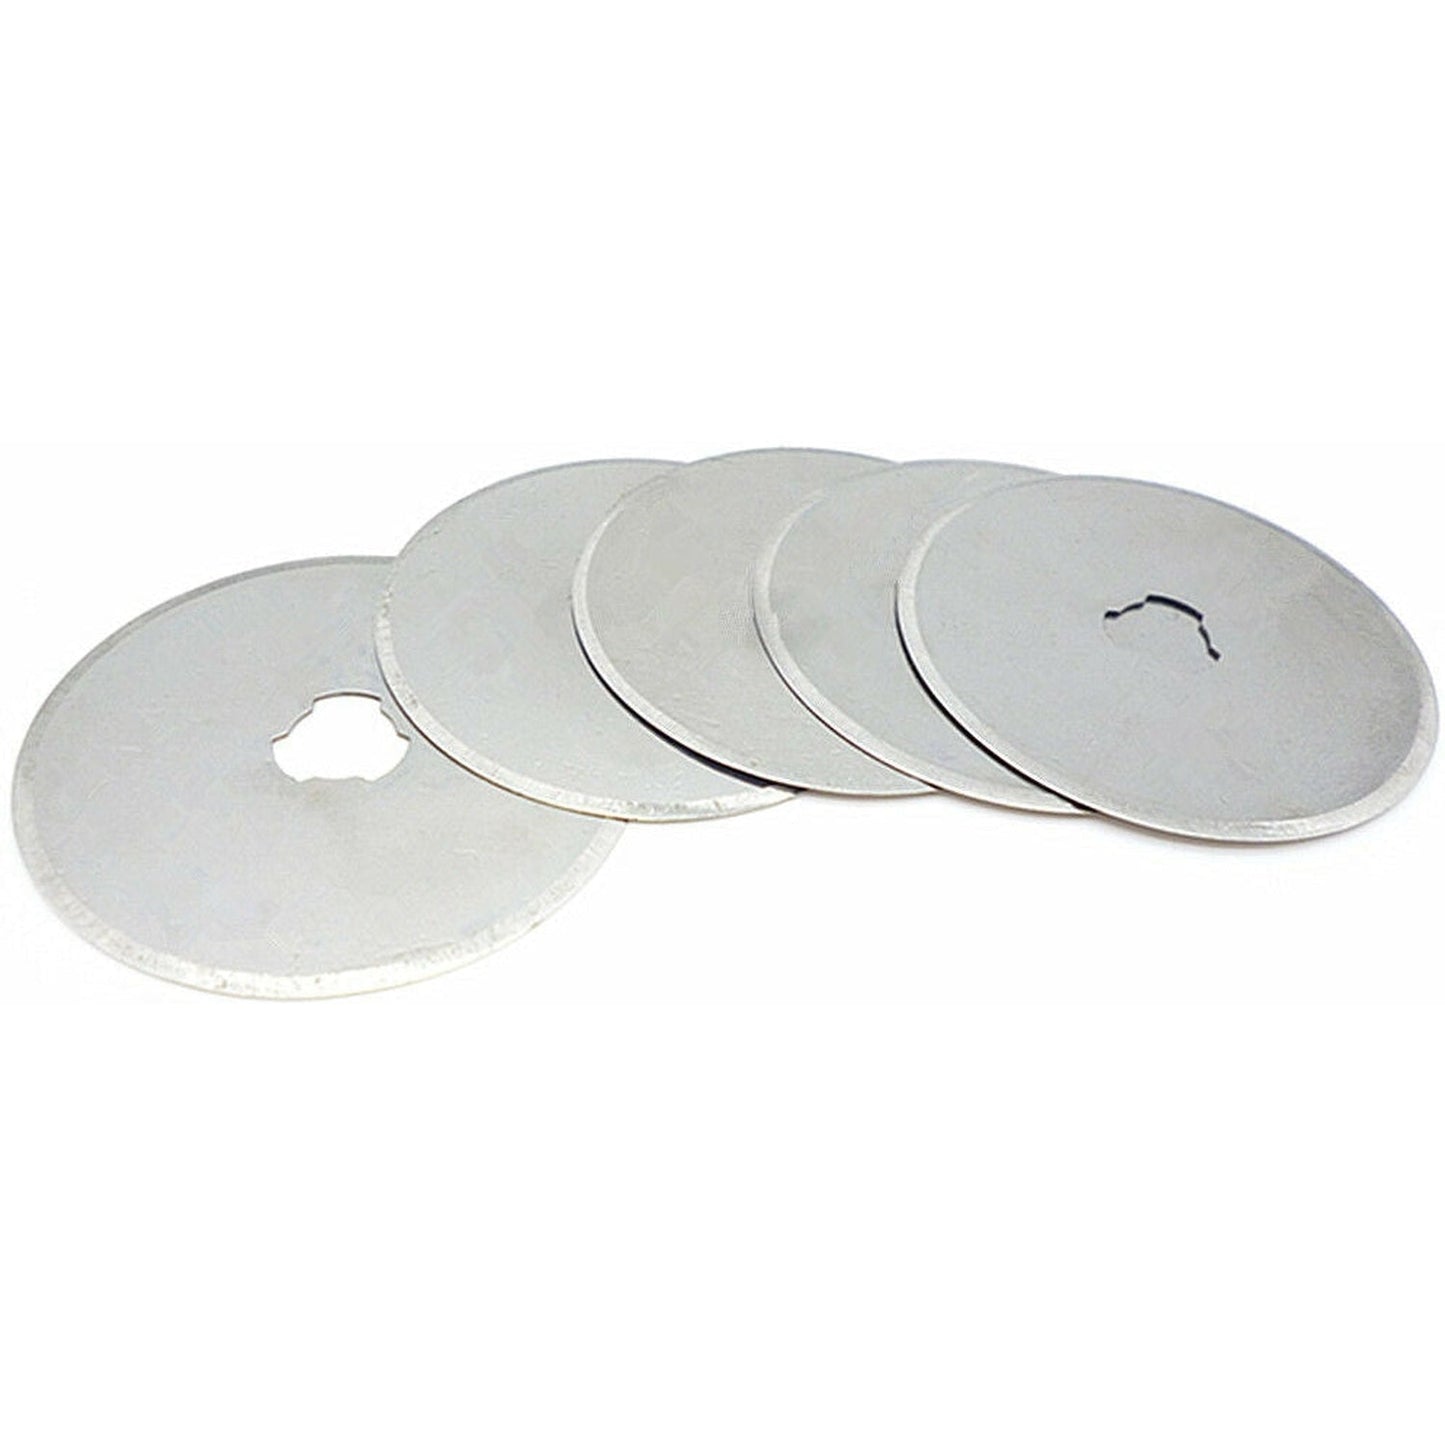 60mm Rotary Cutter Blades (10 Pack)